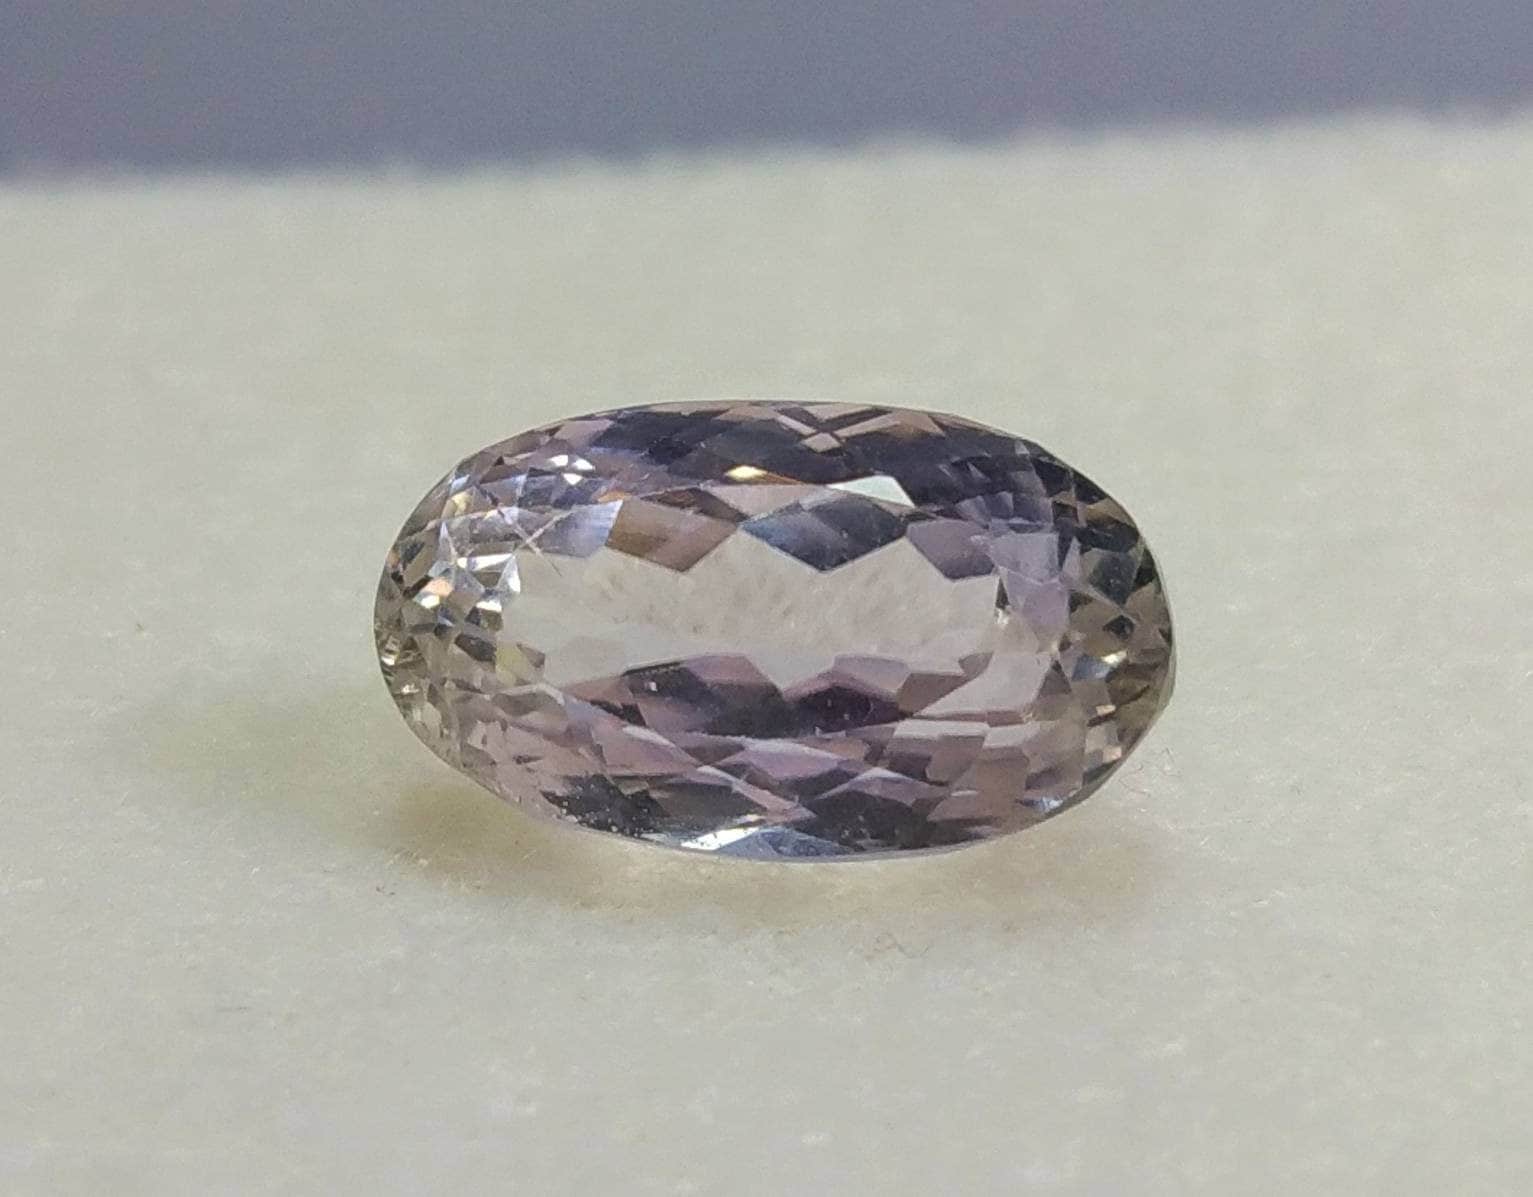 ARSAA GEMS AND MINERALSNatural top quality beautiful 7 carat VV clarity faceted oval shape kunzite gem - Premium  from ARSAA GEMS AND MINERALS - Just $30.00! Shop now at ARSAA GEMS AND MINERALS